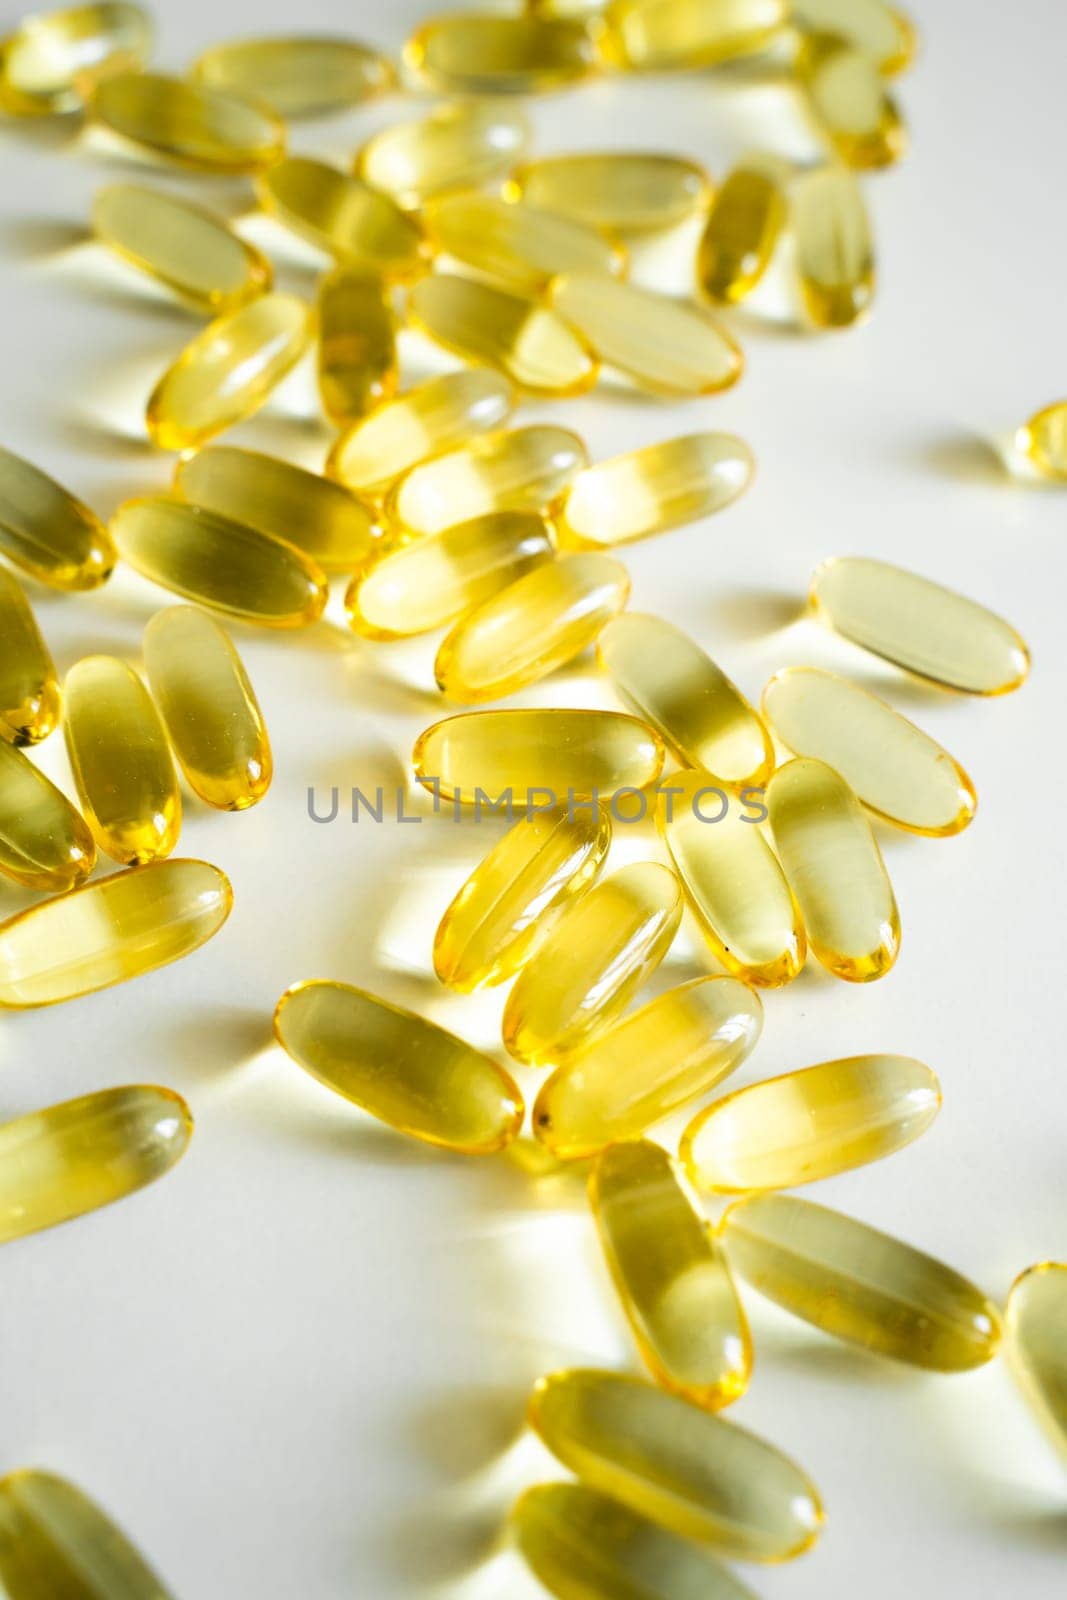 Gelatin capsules of omega 3, 6, 9 fish oil, vitamin isolated on a white surface as a background. by vovsht